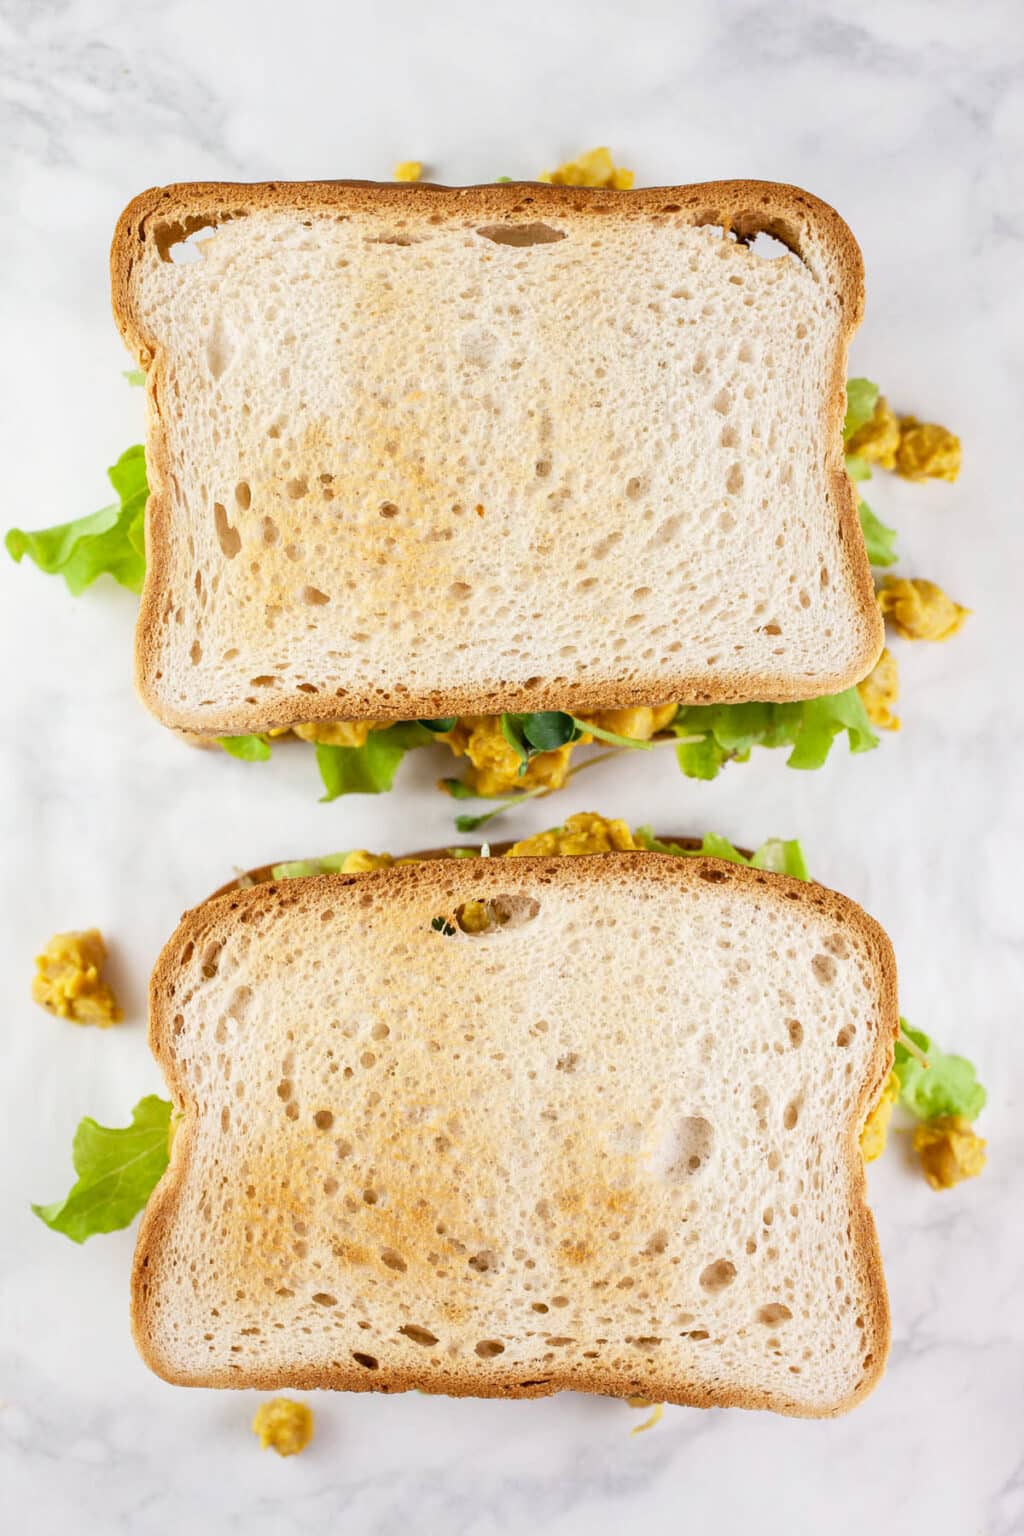 Curried Chickpea Salad Sandwich The Rustic Foodie®